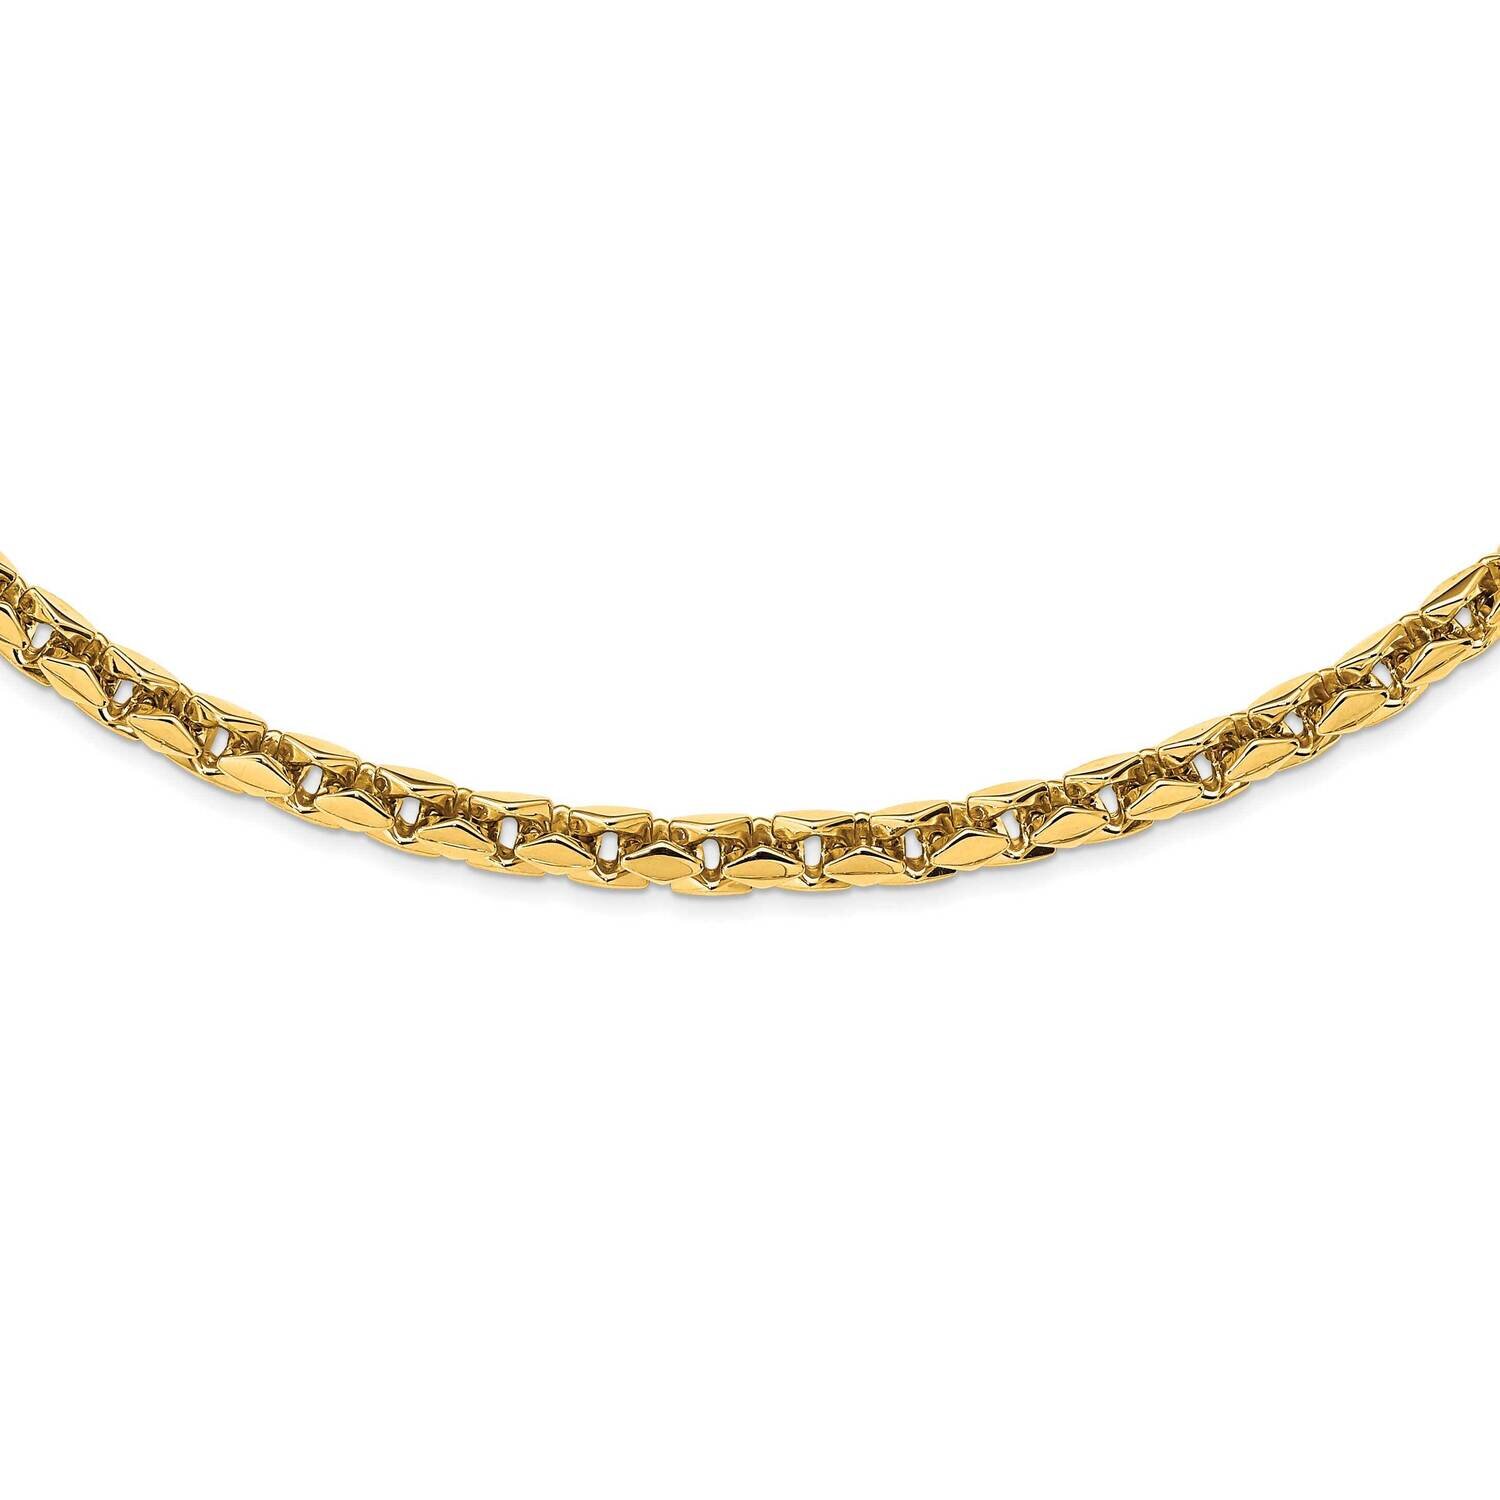 Chain Necklace 20 Inch 14K Yellow Gold Polished GB266-20